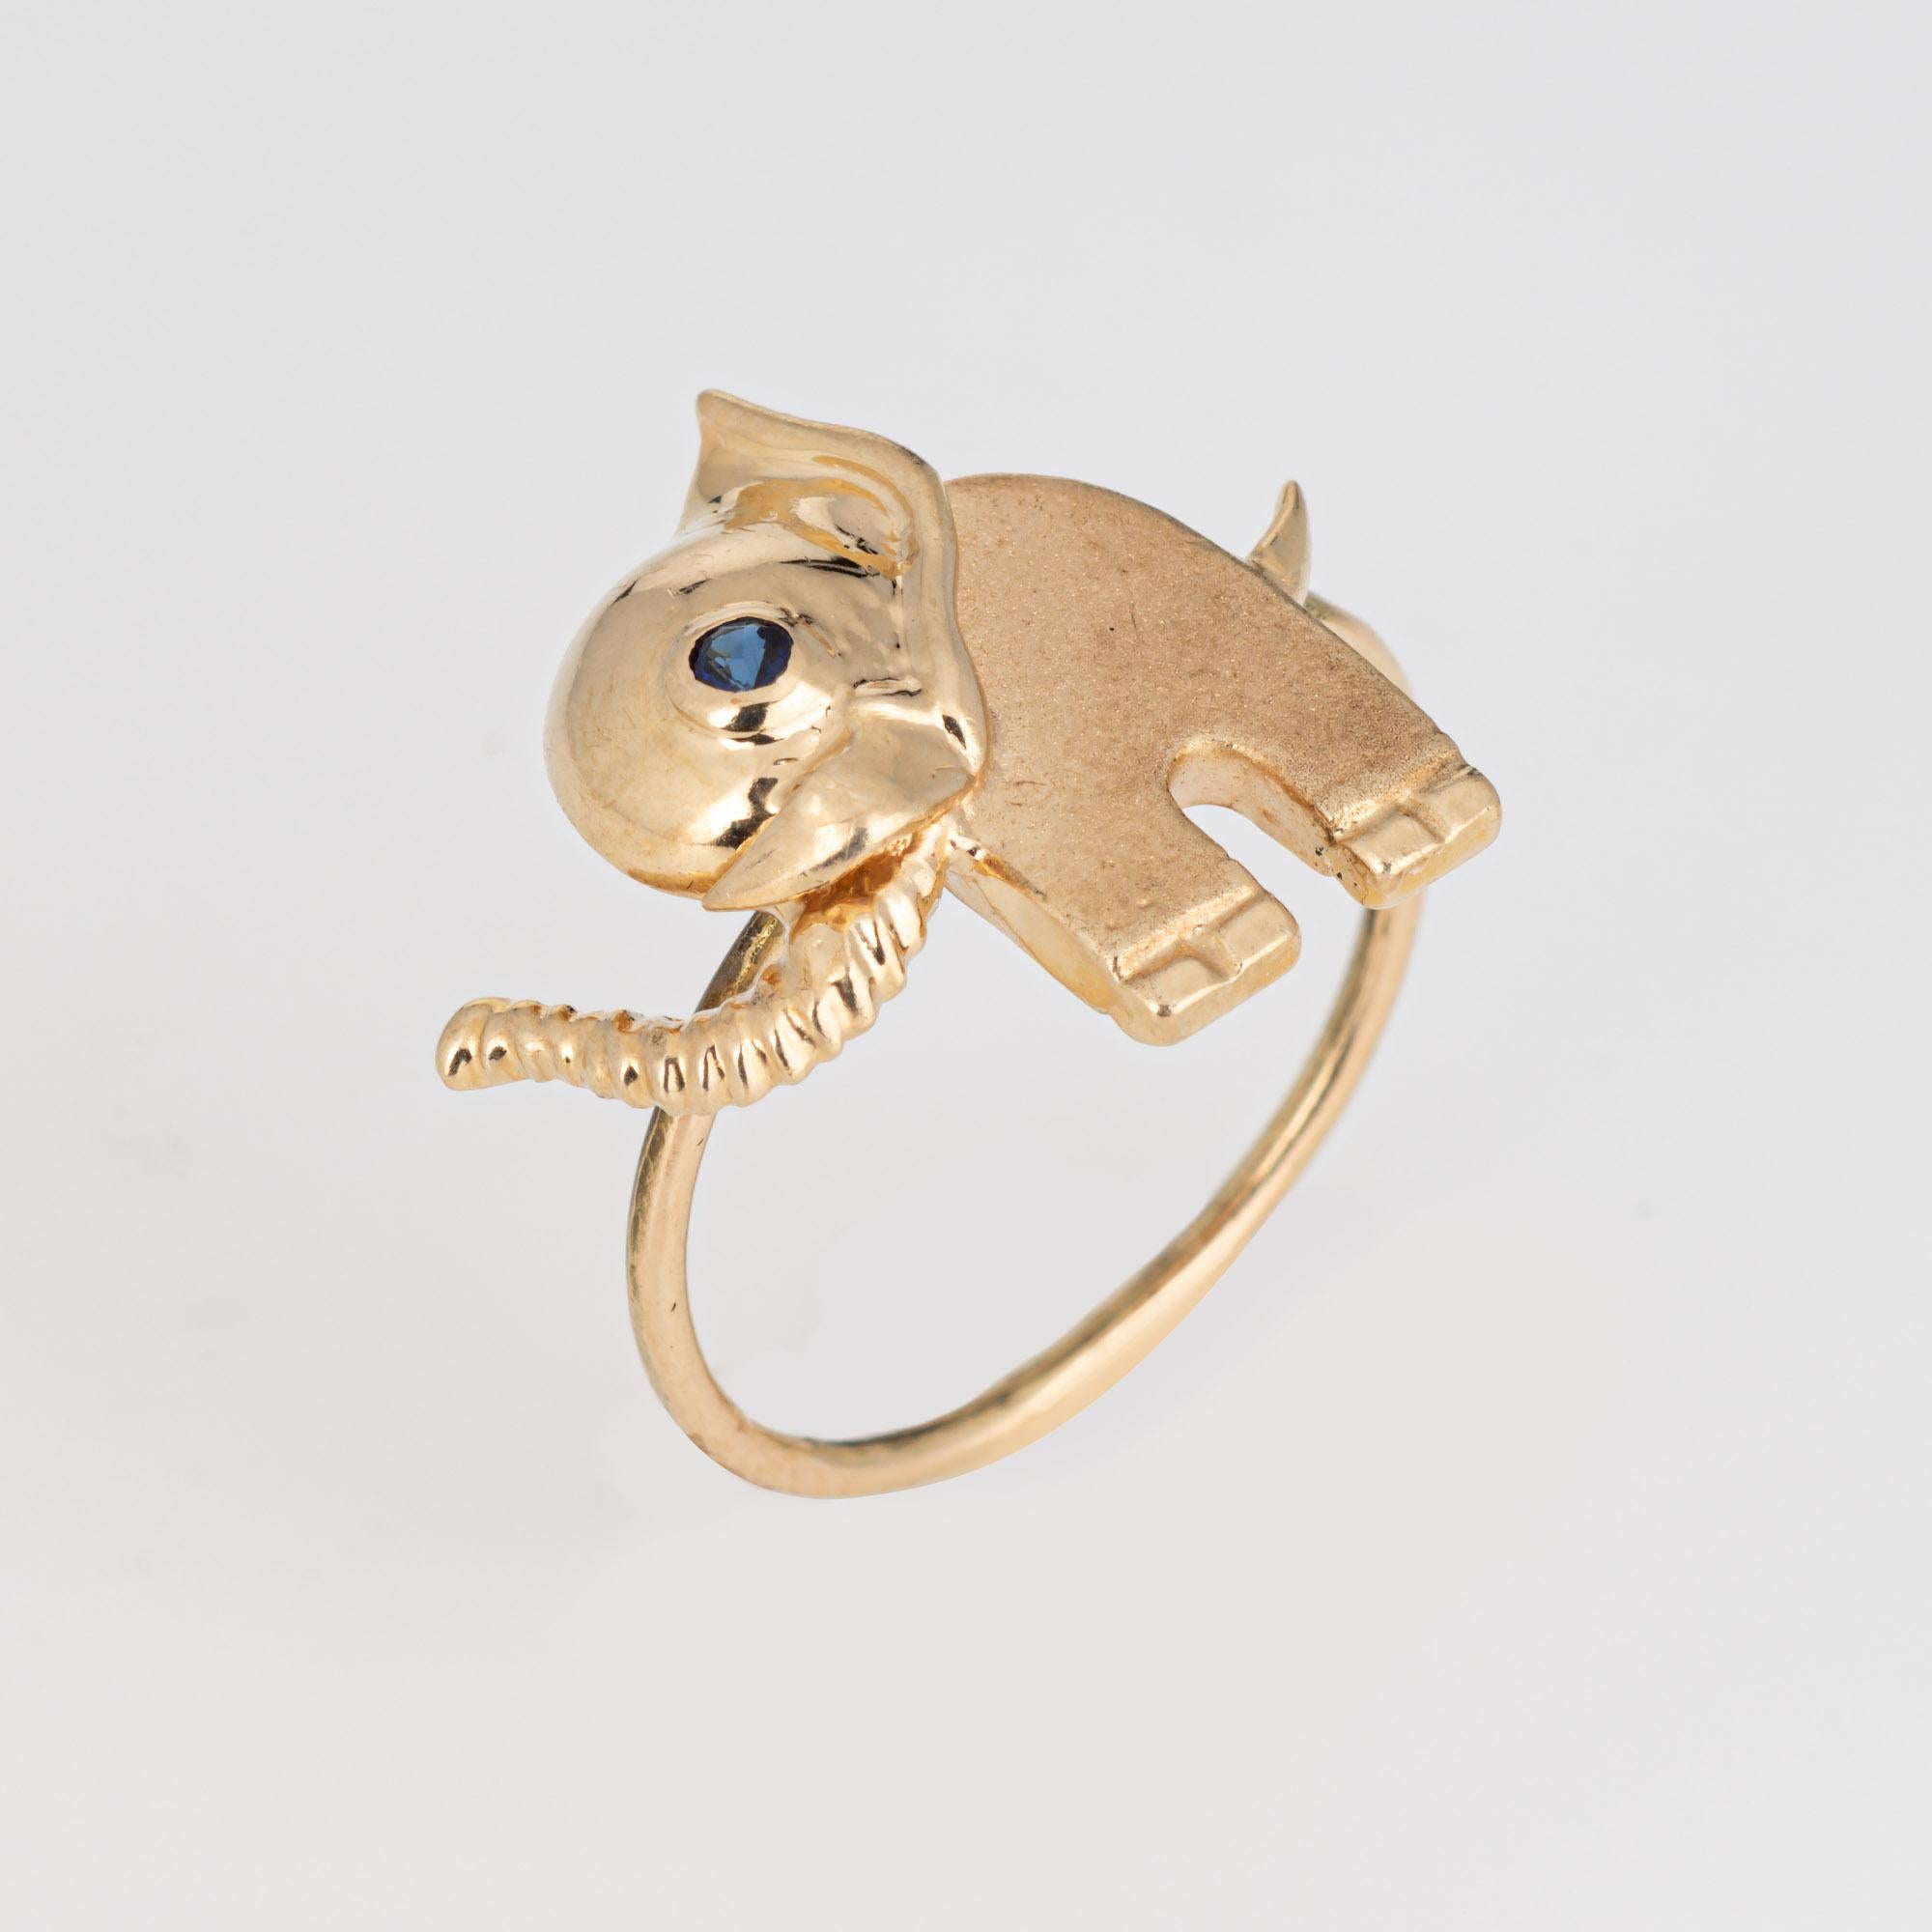 Originally a vintage stick pin the Elephant ring is crafted in 14 karat yellow gold.

The ring is mounted with the original stick pin. Our jeweler rounded the stick pin into a slim band for the finger. The beautifully detailed ring features a